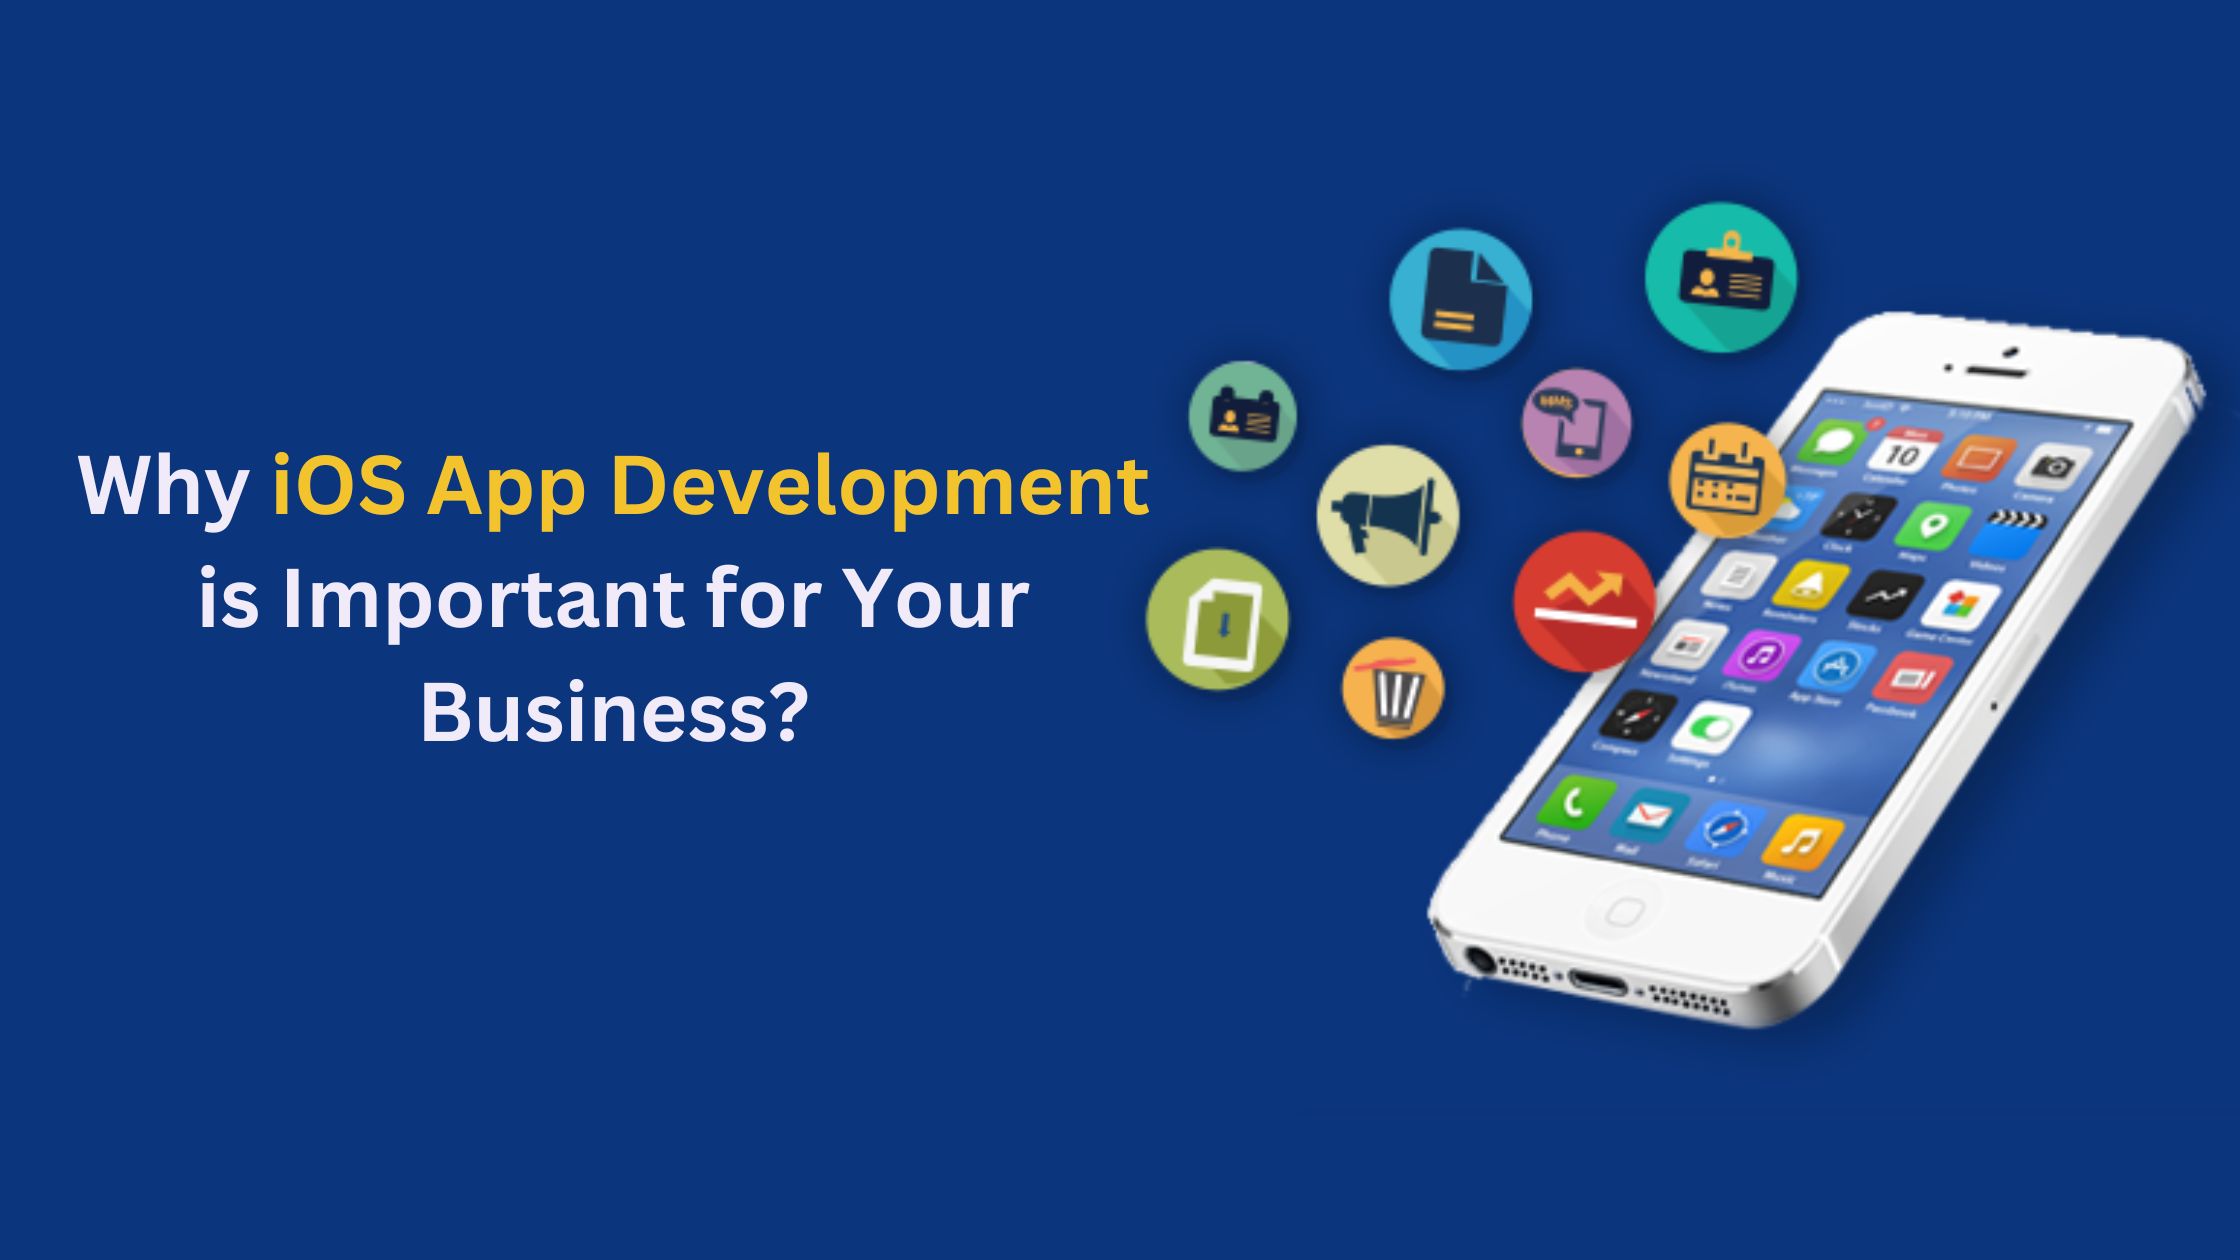 Why iOS App Development is Important for Your Business